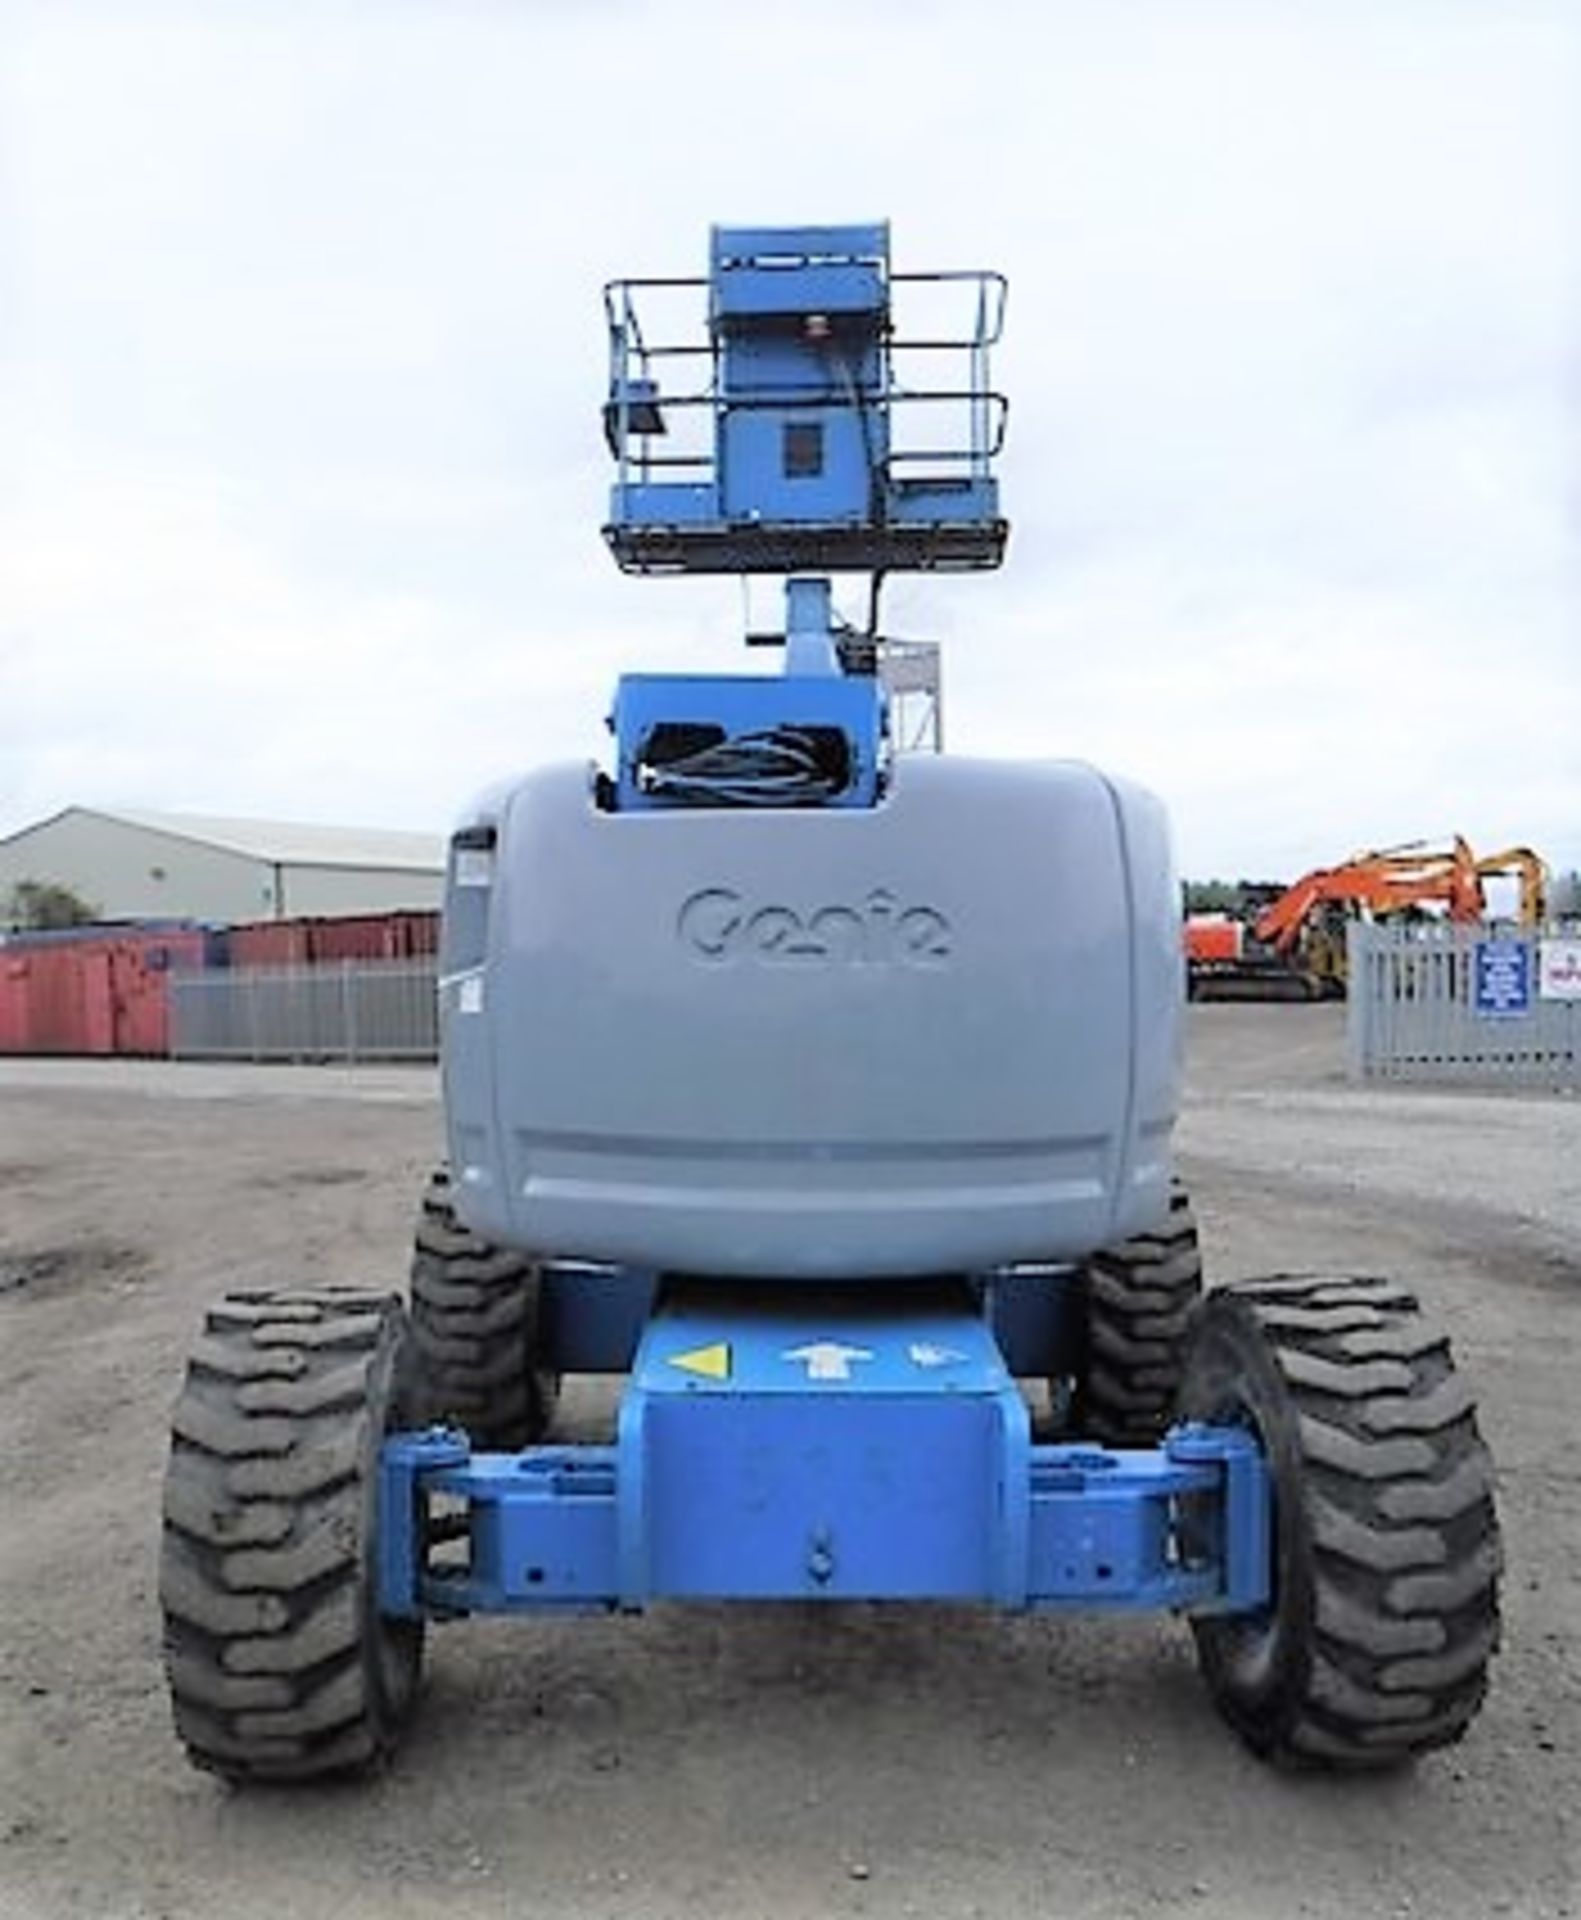 2000 GENIE BOOM LIFT Z45.25. S/N 15155. 8050.5hrs (not verified). Max working height 15.8m, outreach - Image 21 of 28